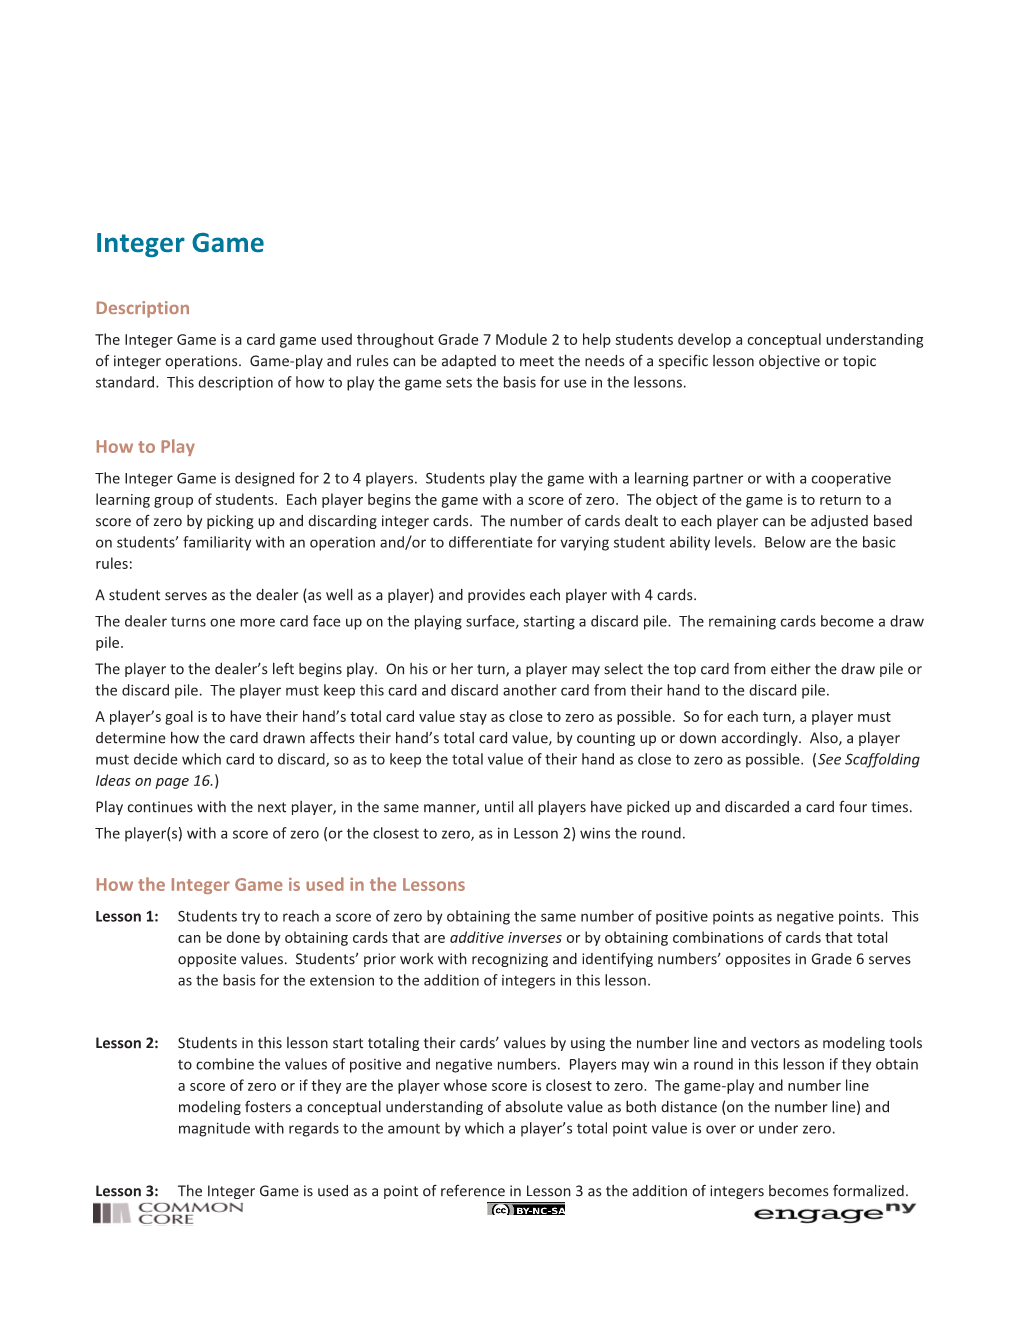 The Integer Game Is a Card Game Used Throughout Grade 7 Module 2 to Help Students Develop